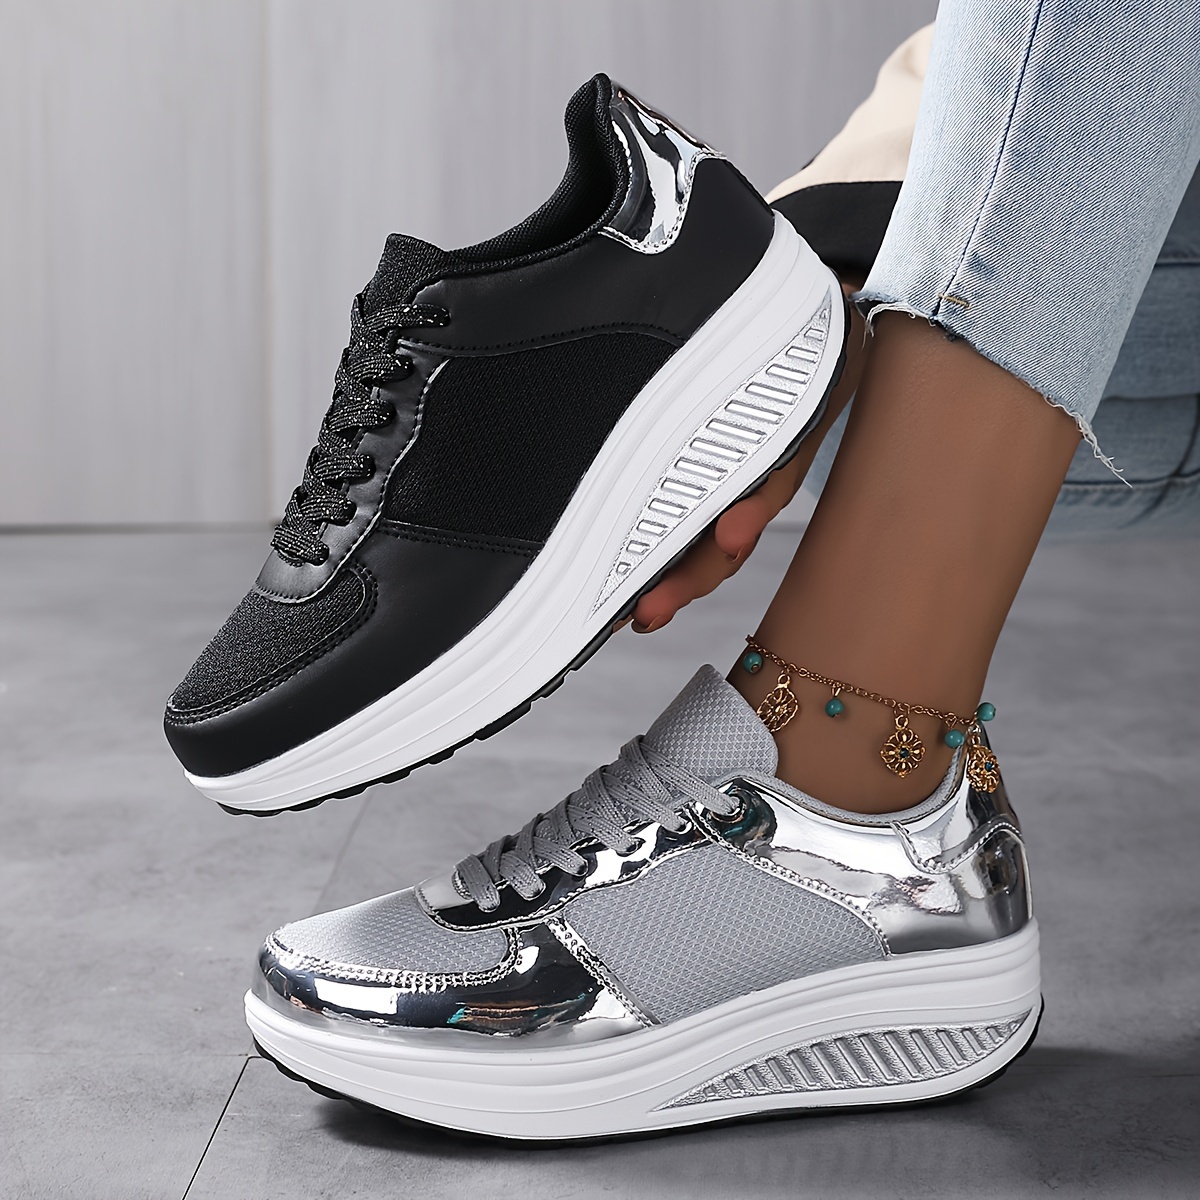 

Women's Platform Fashion Wedge Sneakers, Lace-up Thick Soled Breathable Walking Shoes, Comfort Low-top Outdoor Casual Sneakers